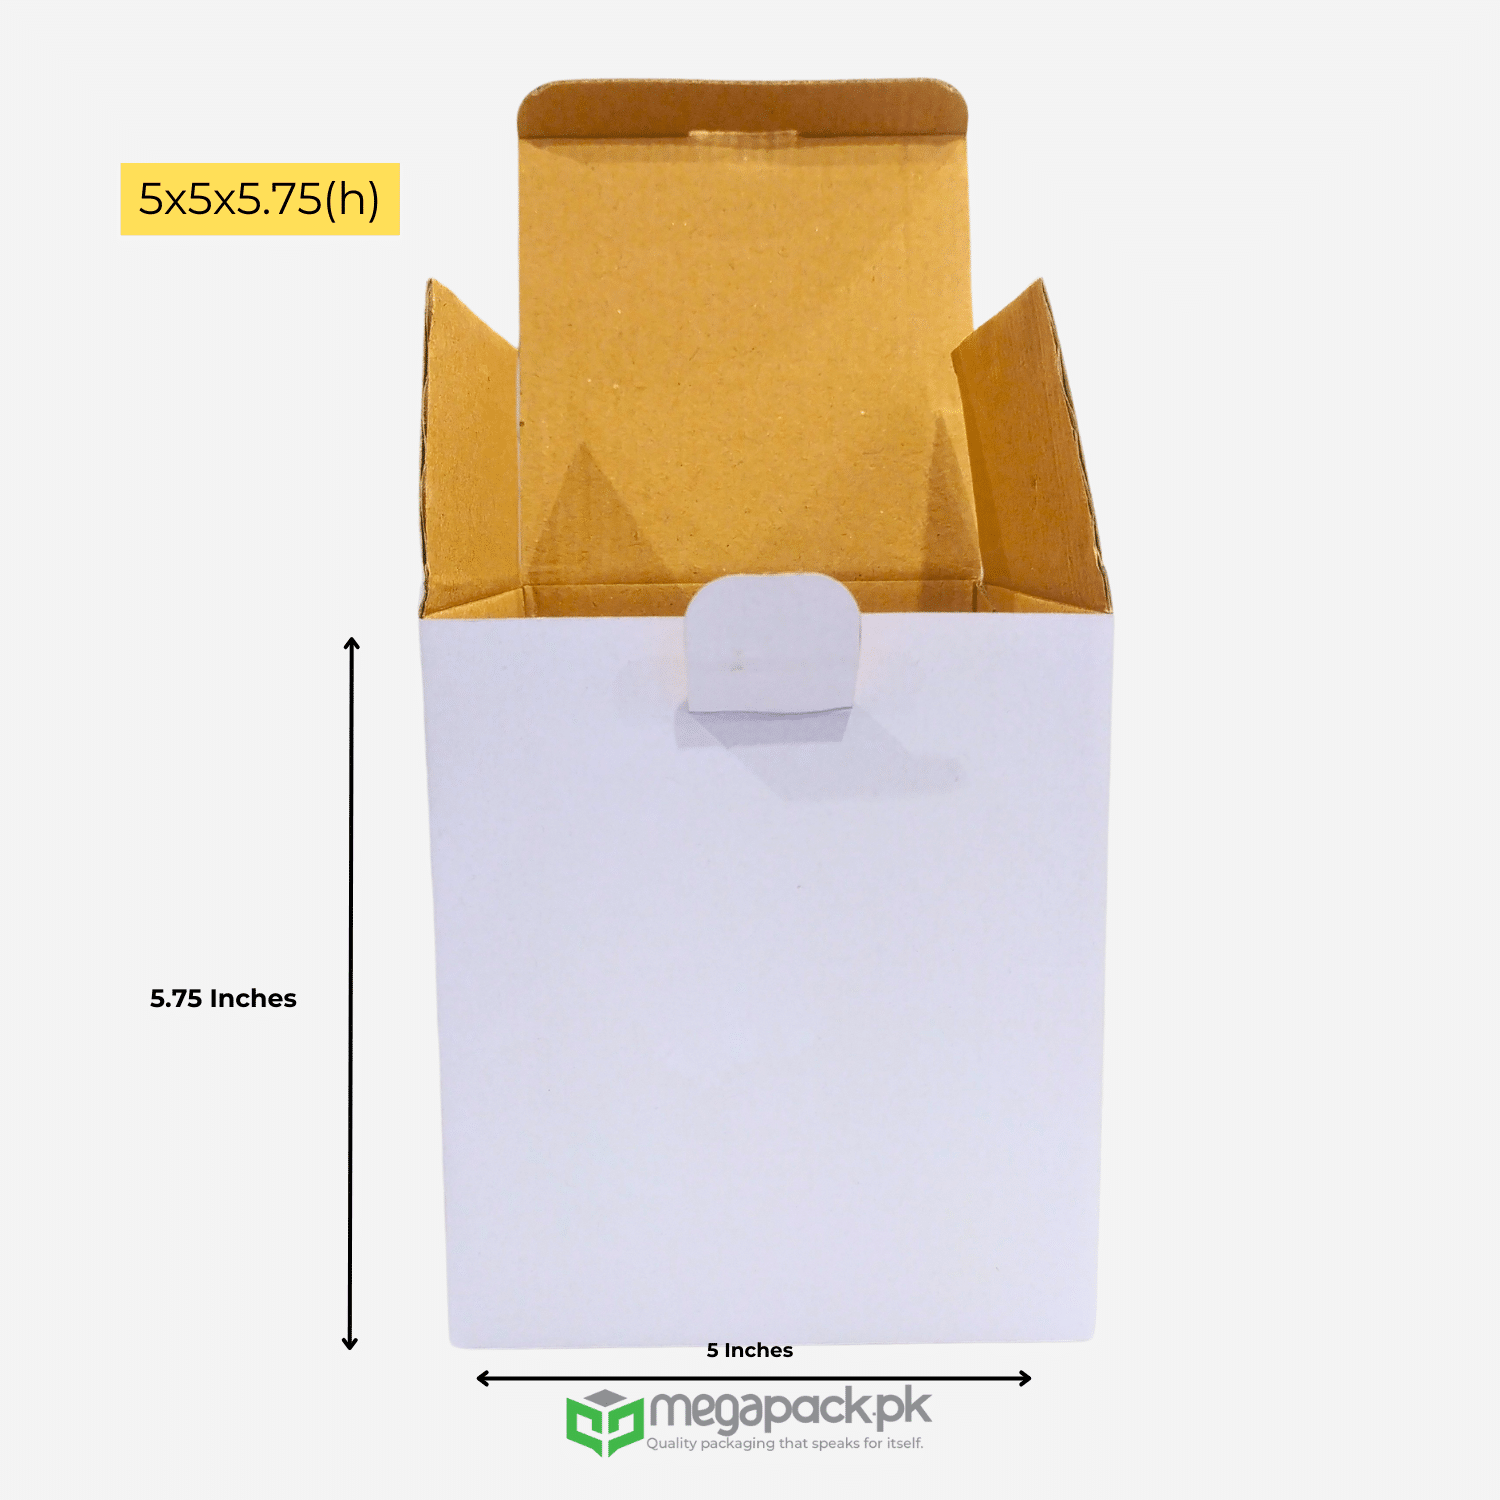 5x5x5.75 Inch Corrugated Boxes | Perfect for Candles Jar & More